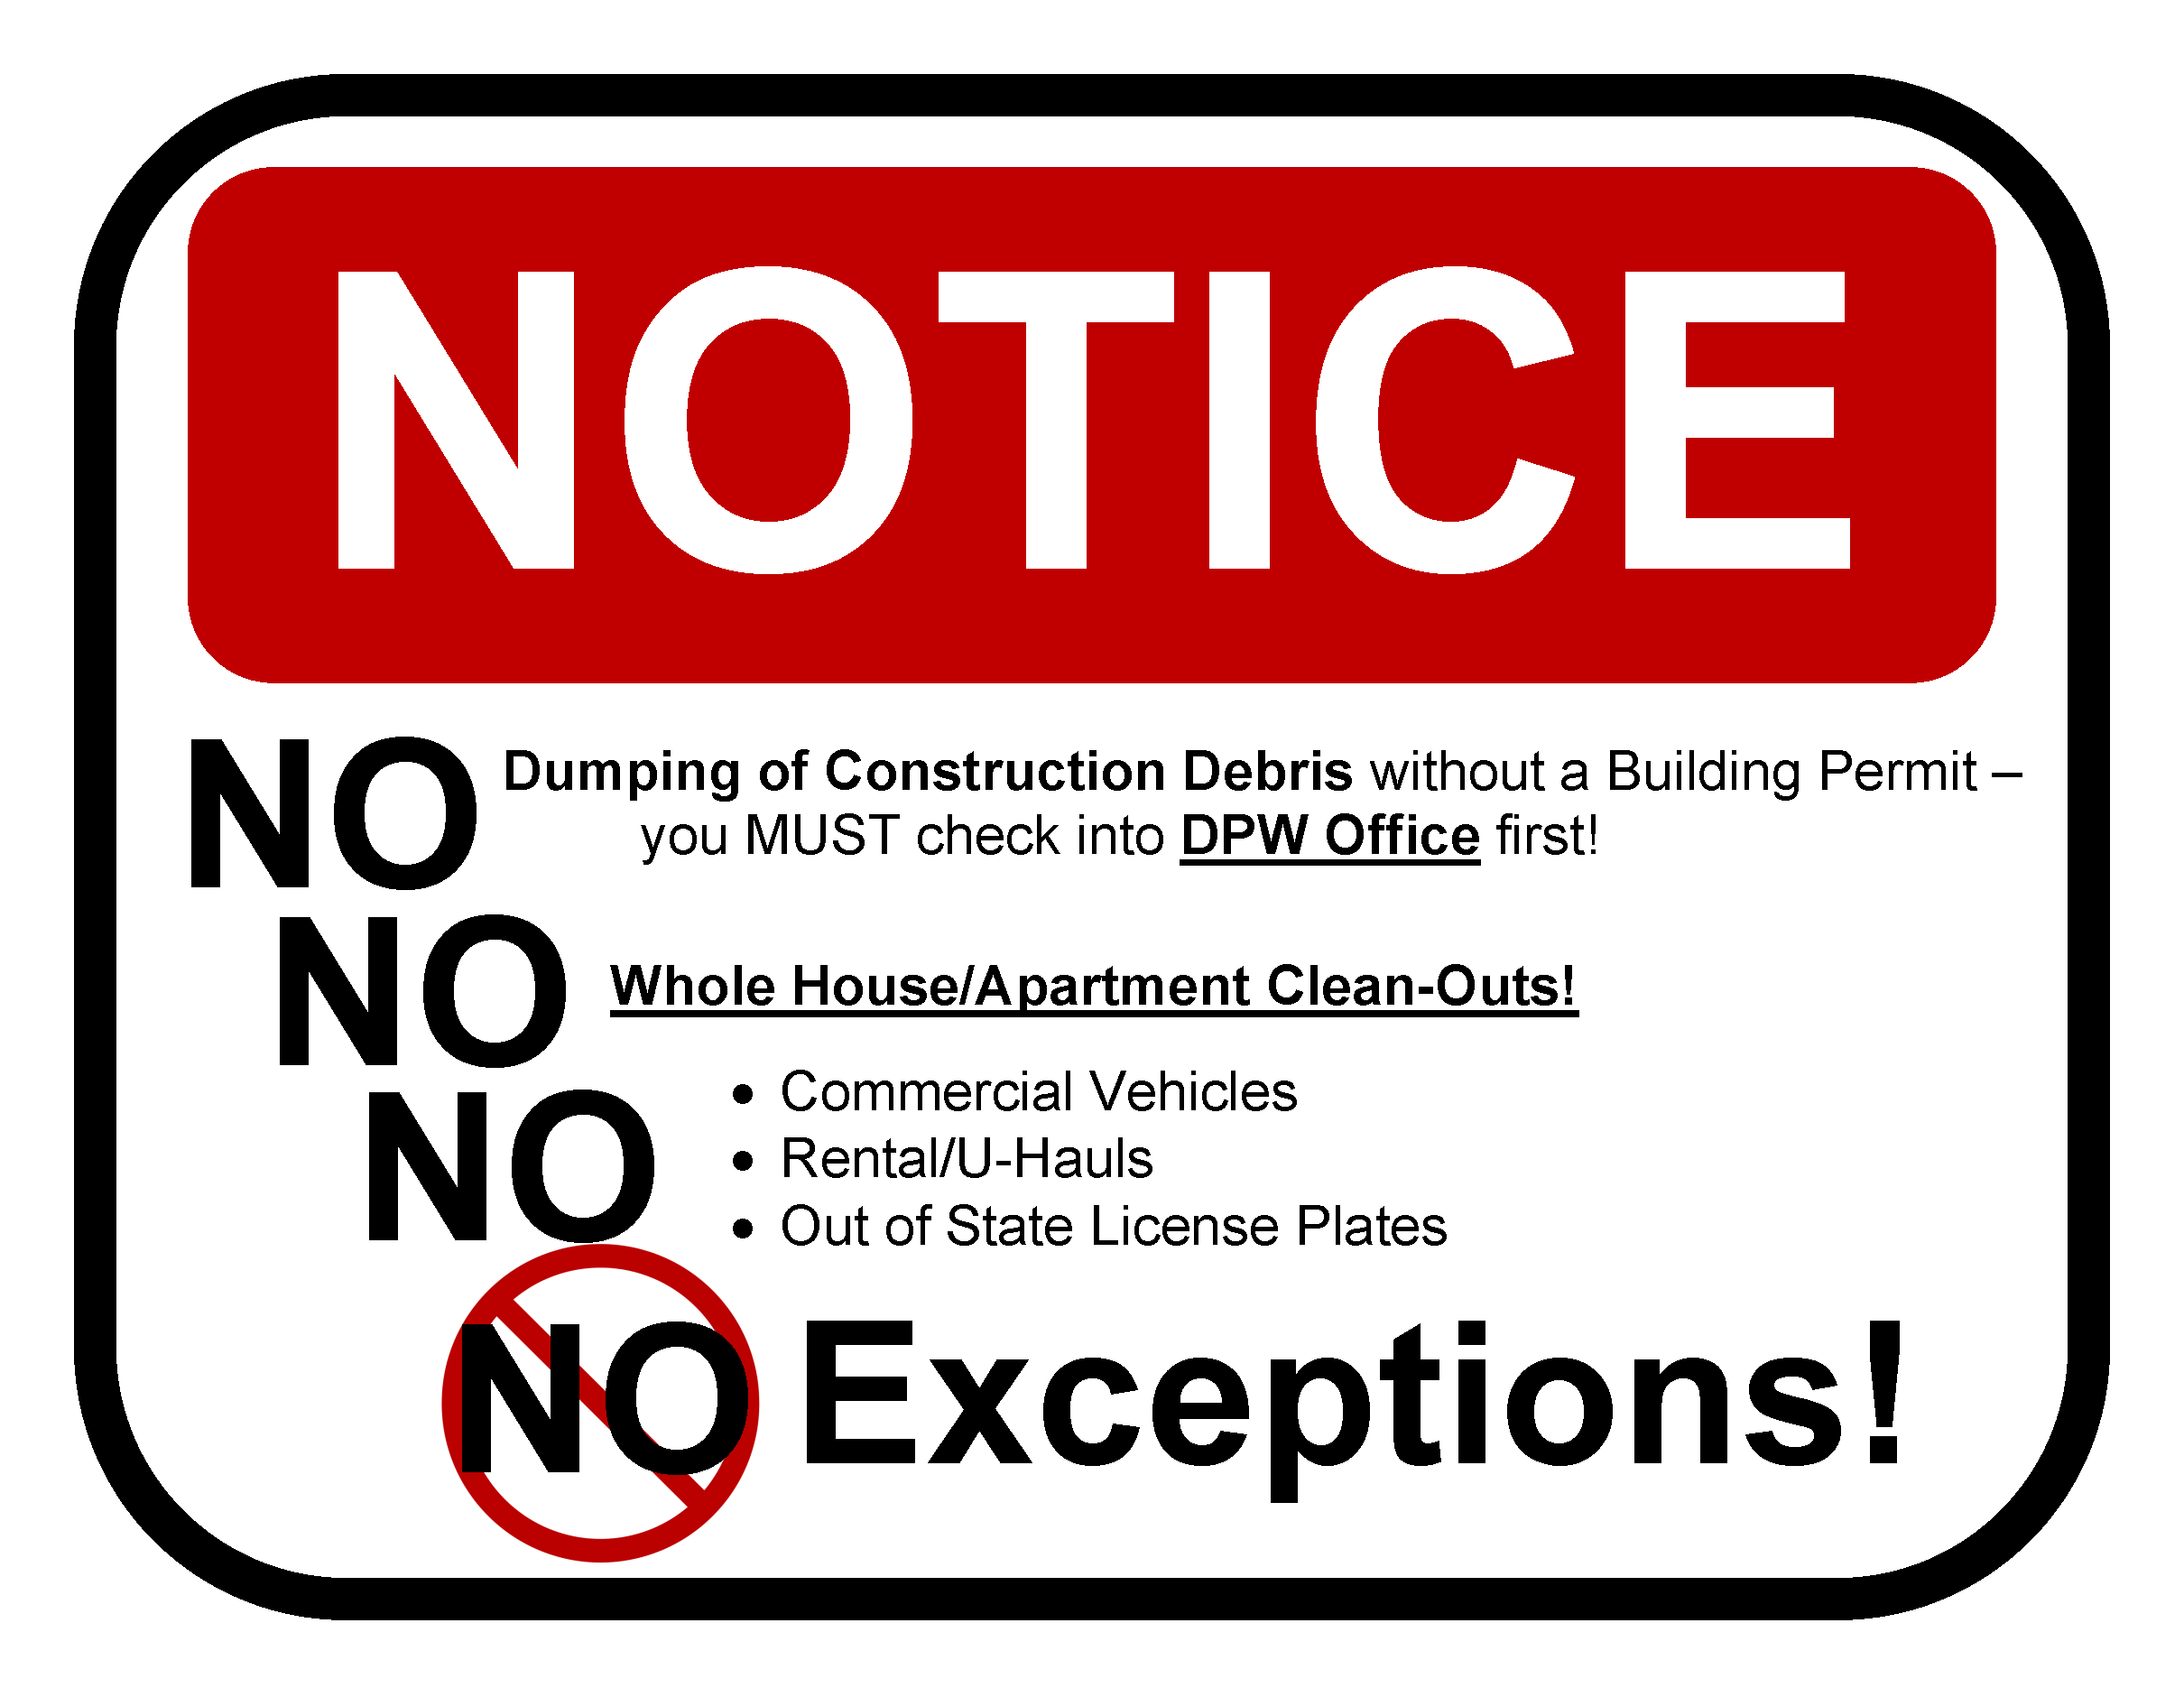  No dumping of construction debris without a Building Permit.  You must check into DPW office first.  No whole house/apartment clean-outs.  No commercial vehicles.  No rentals / U-hauls.  No out of state license plates.  No exceptions.